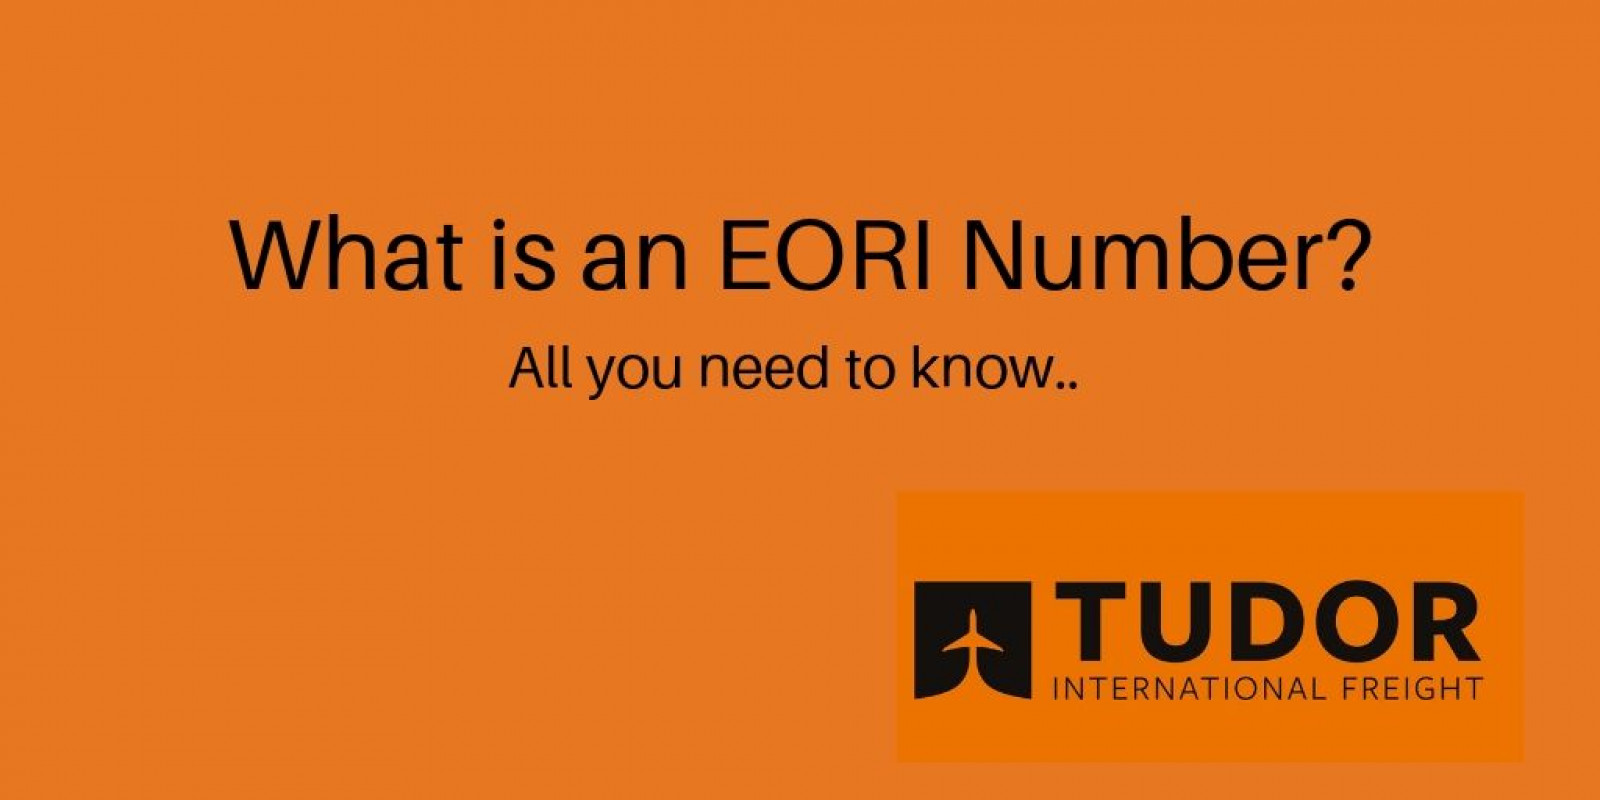 What is an EORI Number?